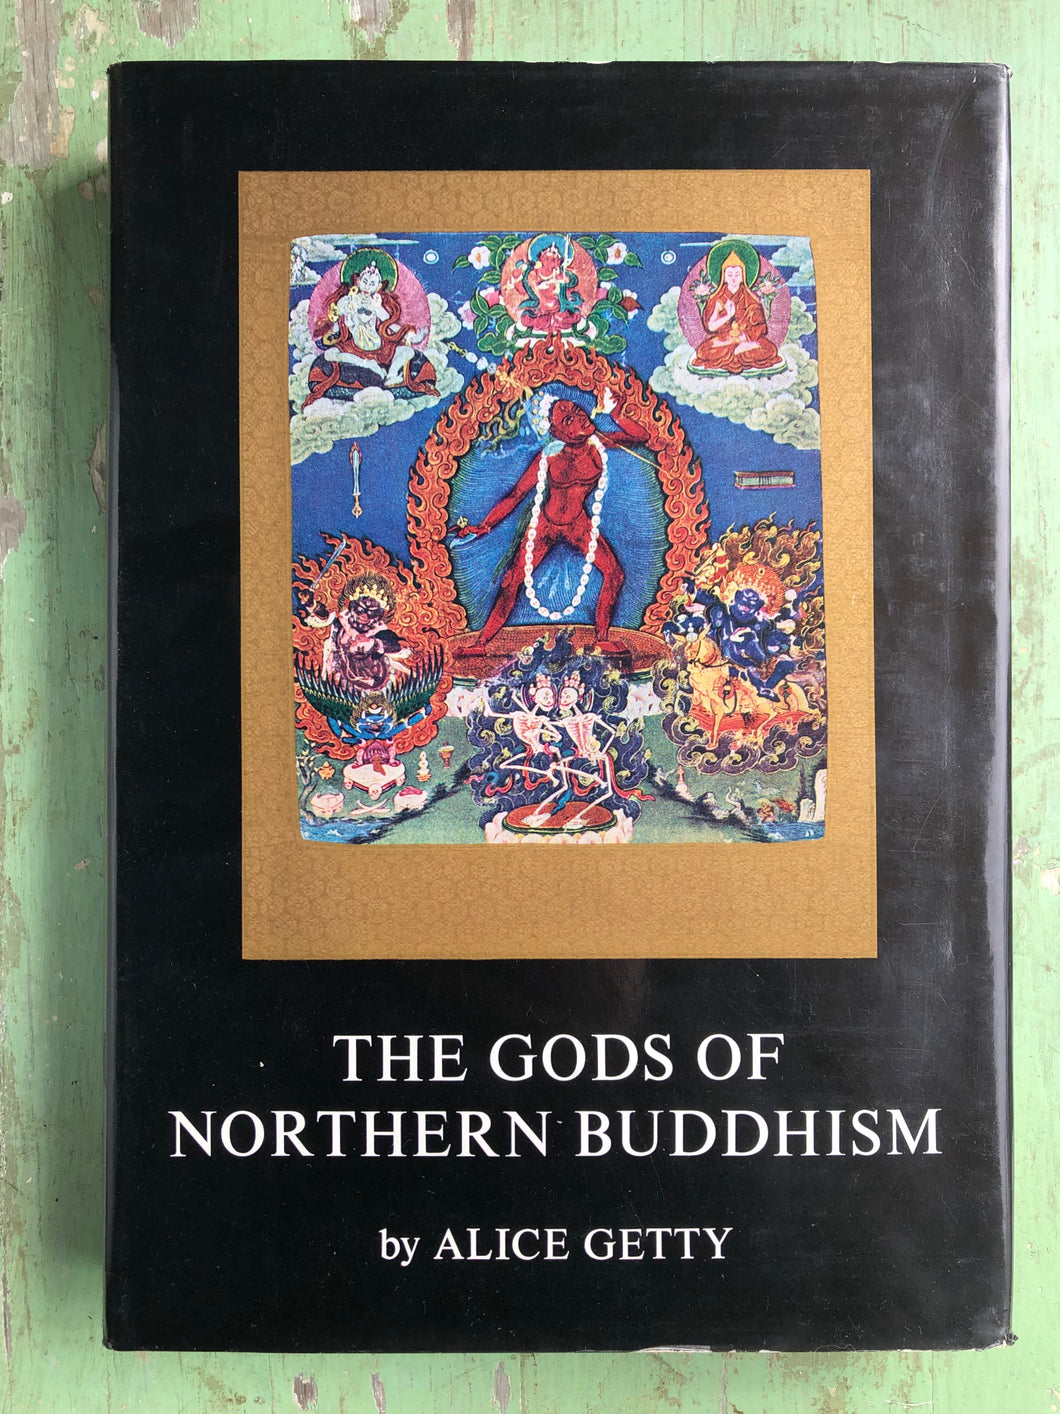 The Gods of Northern Buddhism: Their History, Iconography and Progressive Evolution Through the Northern Buddhist Countries by Alice Getty